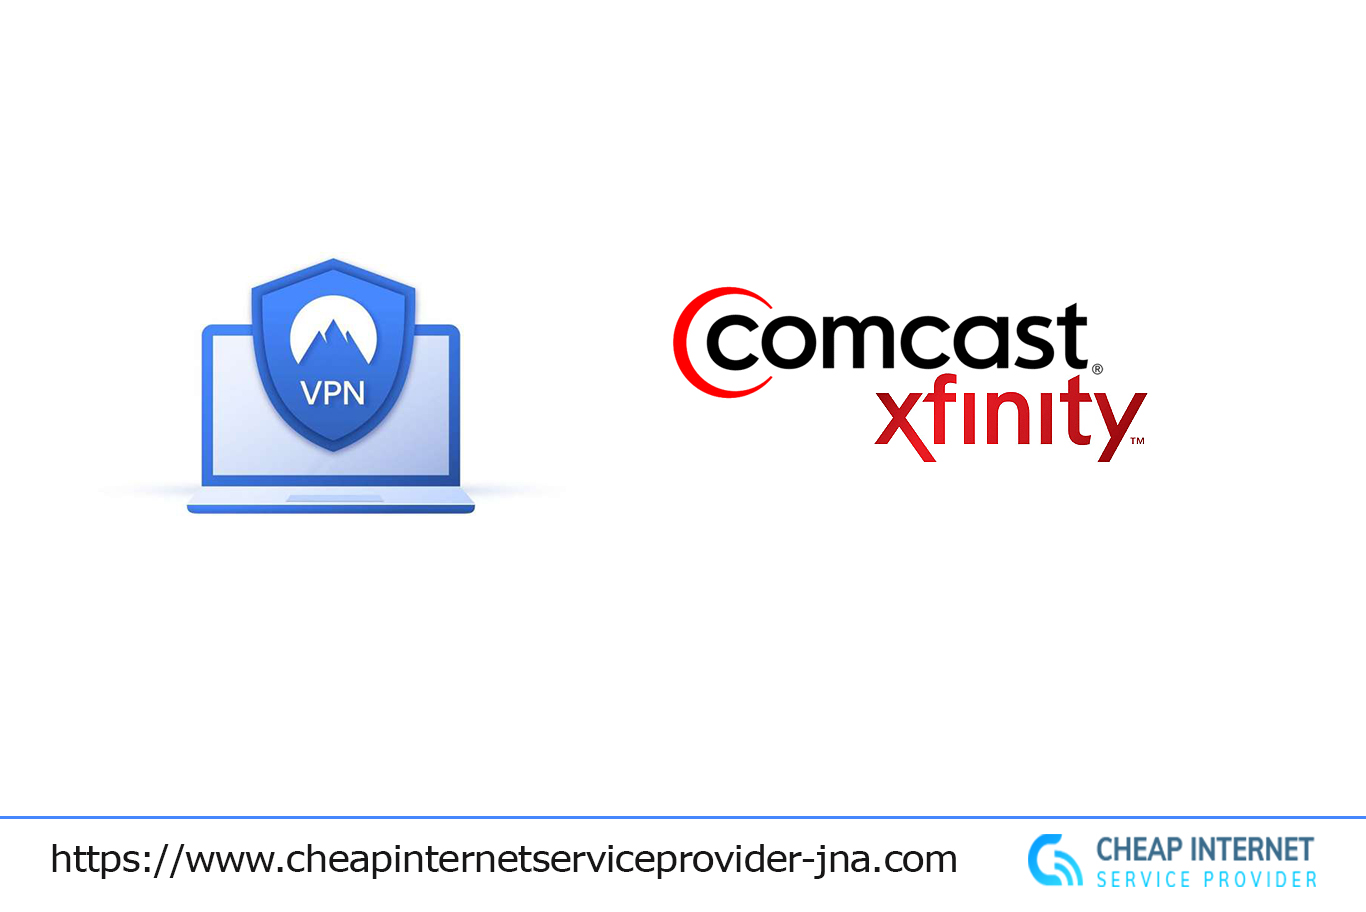 The Best VPN Services for Comcast Xfinity